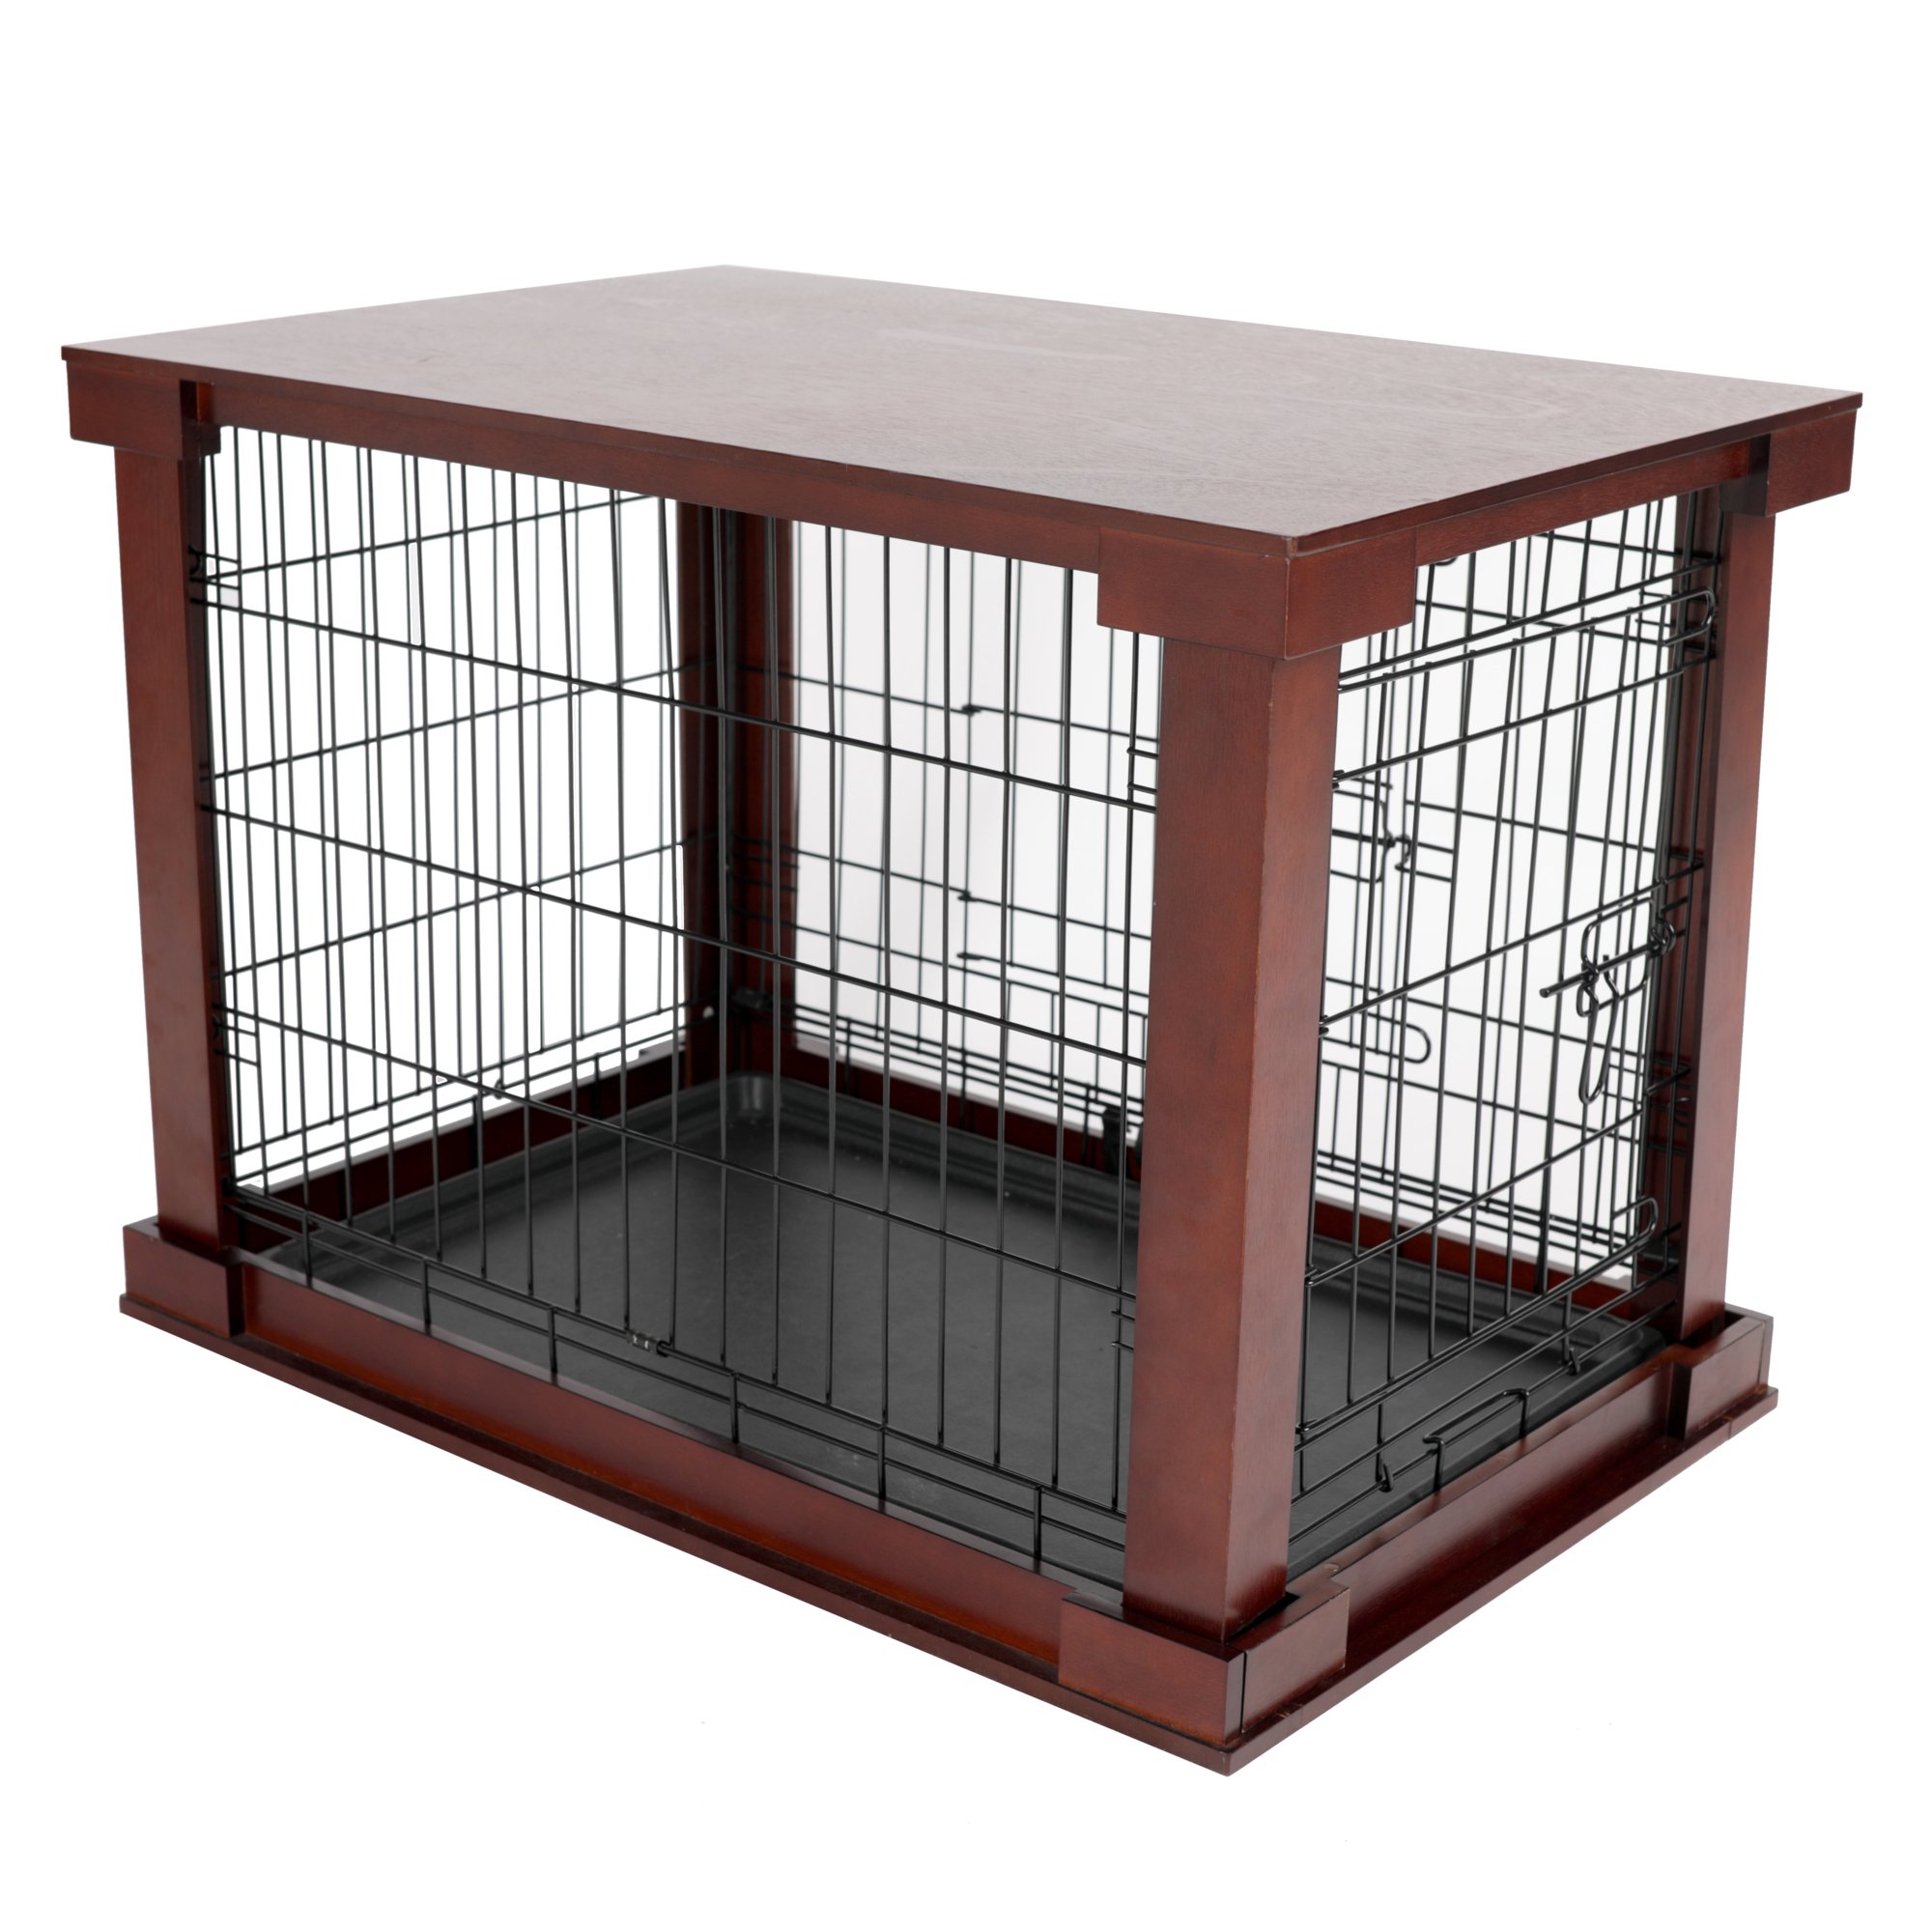 Merry Products, Cage with Crate Cover, Mahogany, Medium, Model MPMC001